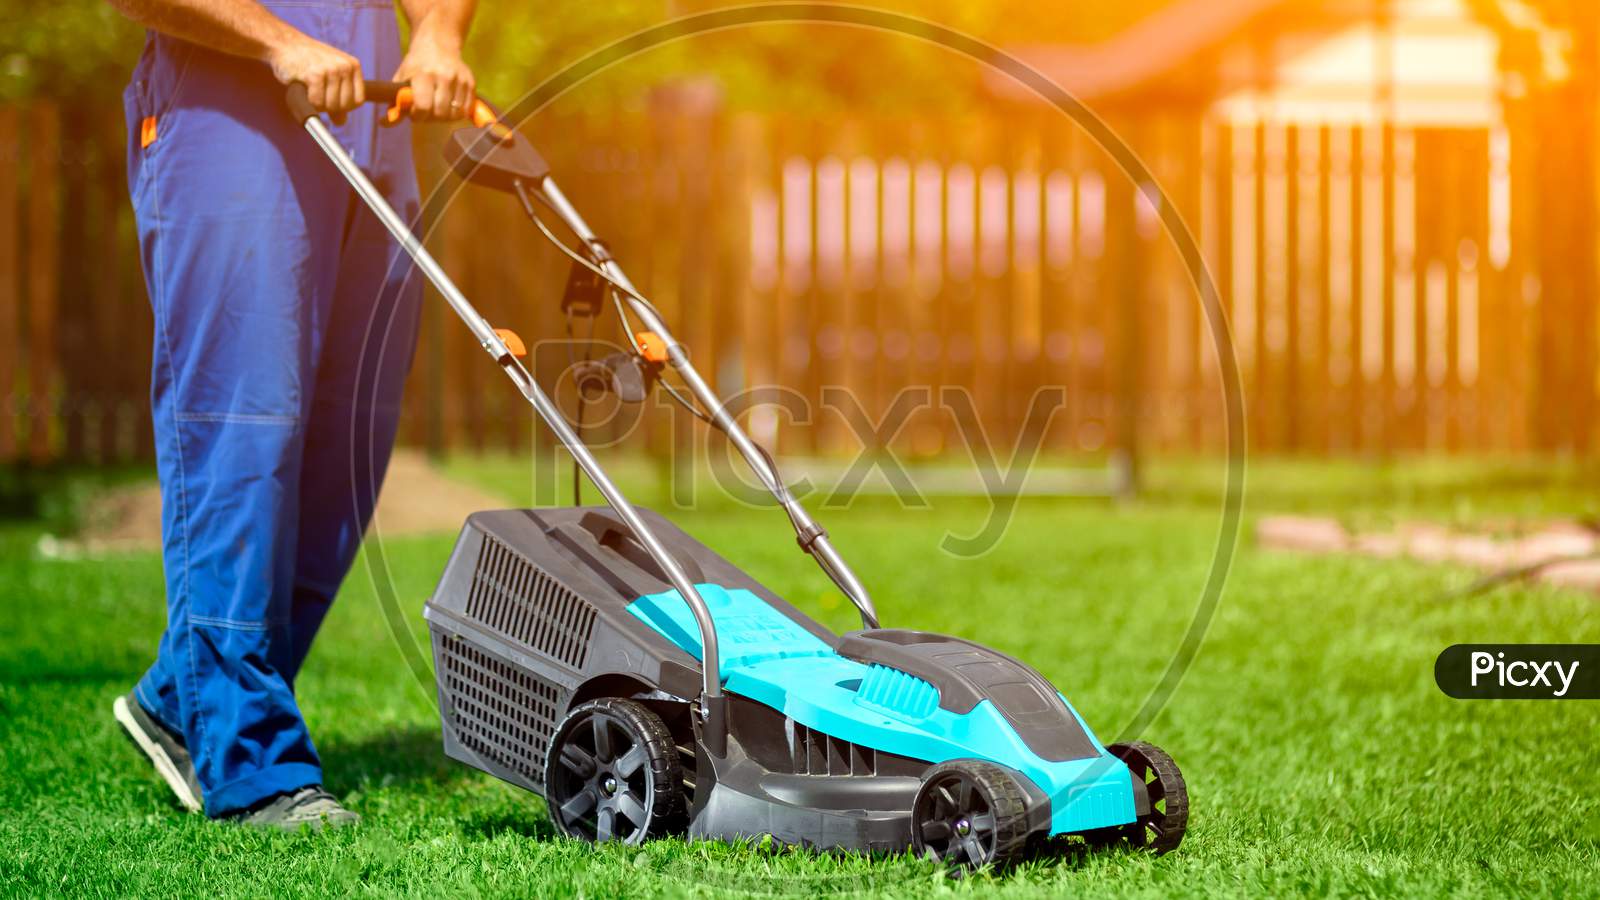 Lawn Grass Mowing. Worker Cutting Grass In A Green Yard. A Man With An Electric Lawn Mower Mowing A Lawn. Gardener Pruning A Garden